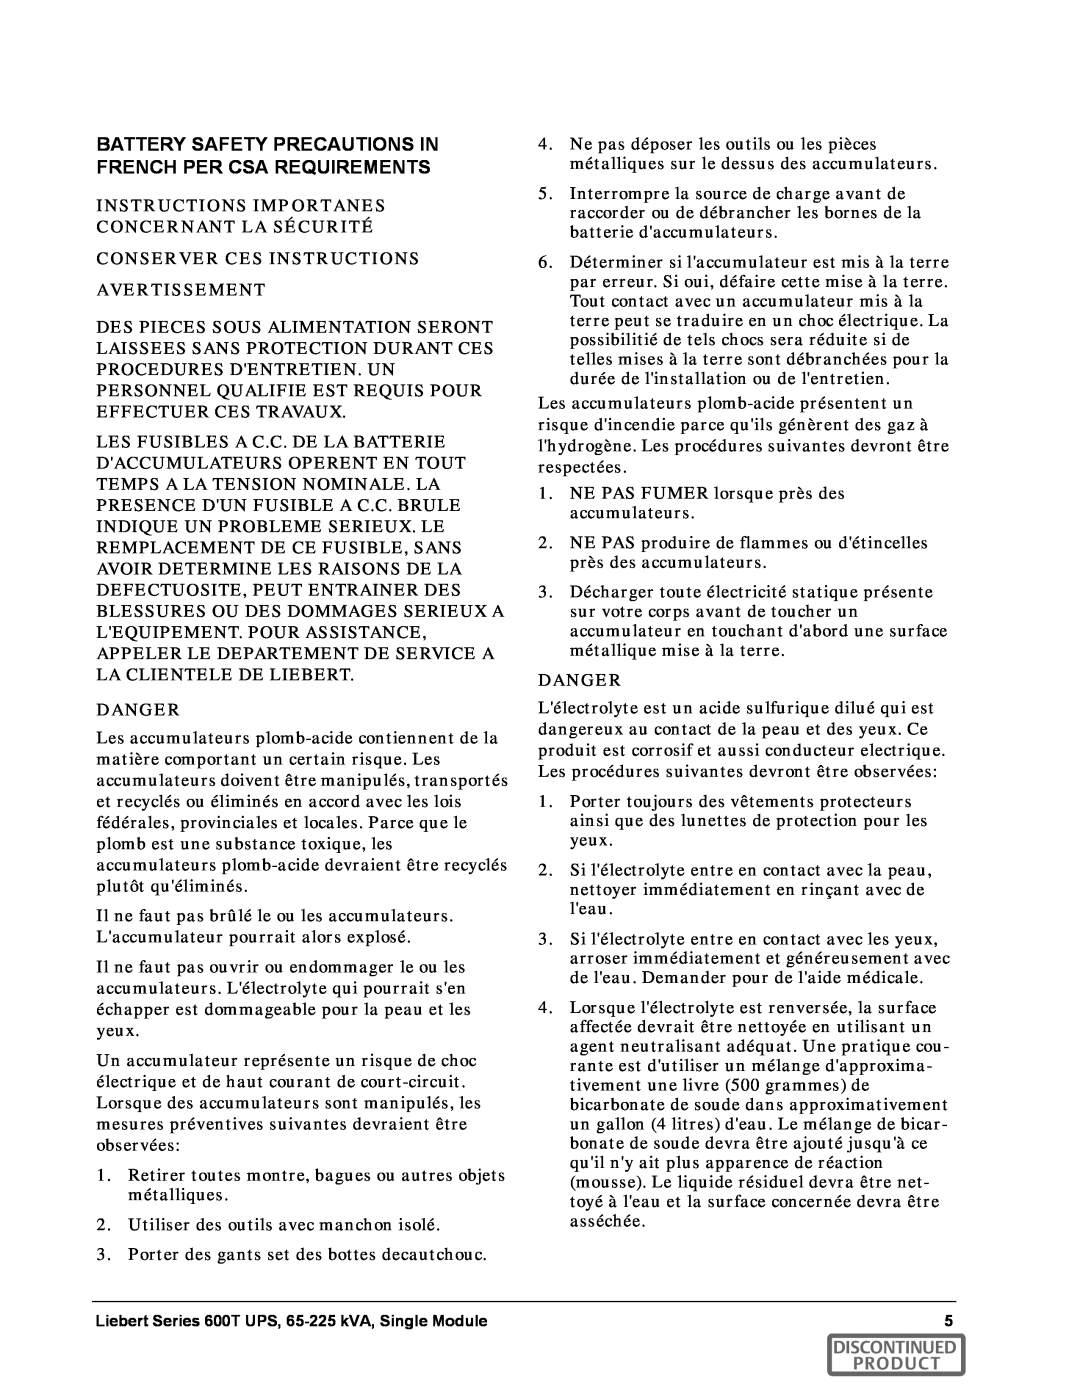 Emerson SERIES 600T manual Battery Safety Precautions In French Per Csa Requirements, Discontinued Product 